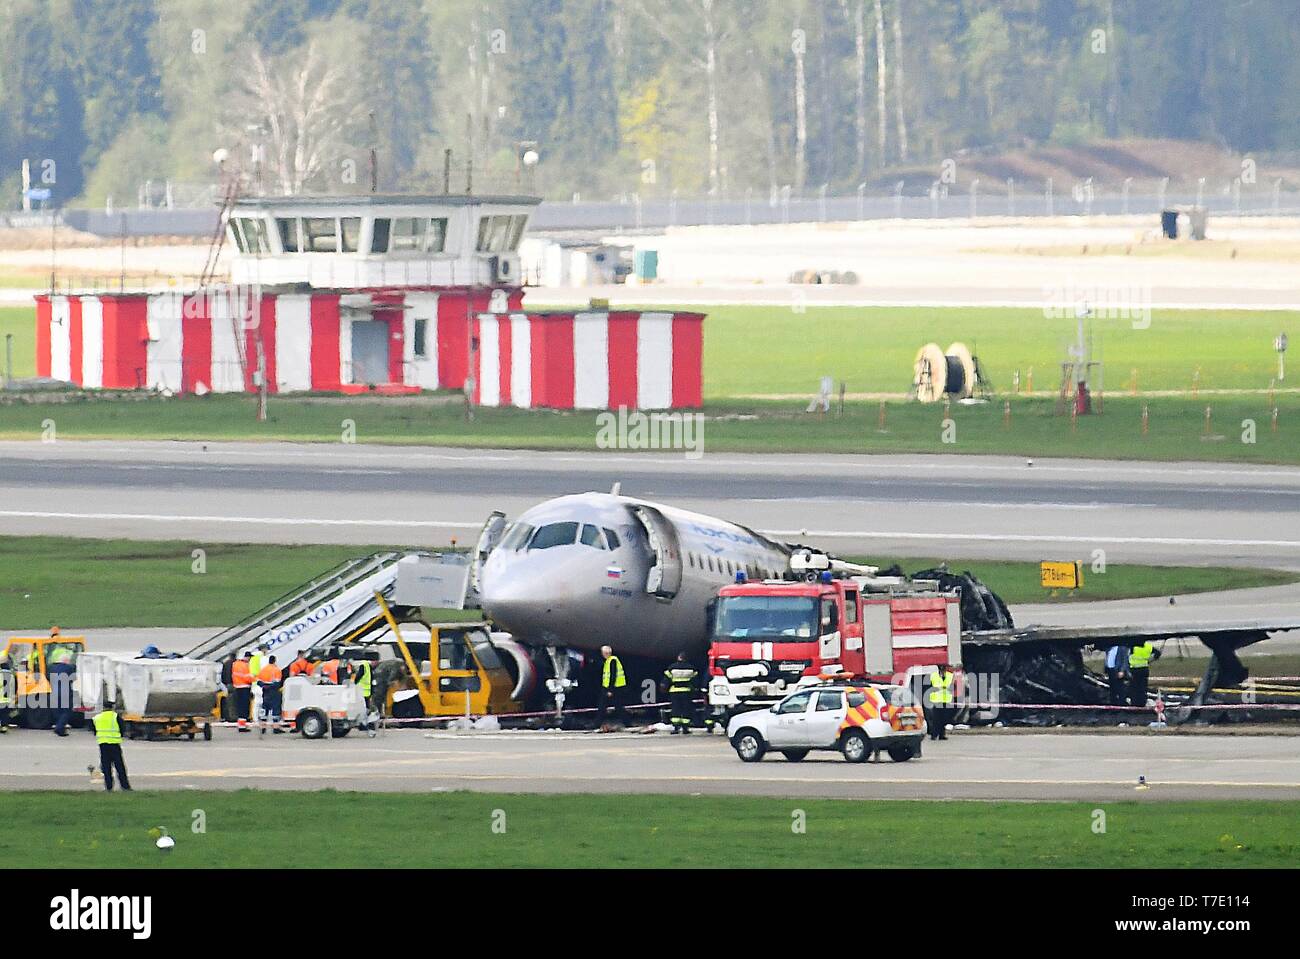 Beijing, Russia. 6th May, 2019. Burnt fuselage of an Aeroflot SSJ-100 passenger plane is seen on the tarmac at Sheremetyevo International Airport in Moscow, Russia, May 6, 2019. Russia's Investigative Committee confirmed Monday that 41 people were killed after an SSJ-100 passenger plane en route to the northwestern Russian city of Murmansk caught fire before an emergency landing Sunday at the Sheremetyevo International Airport in Moscow. Credit: Sputnik/Xinhua/Alamy Live News Stock Photo